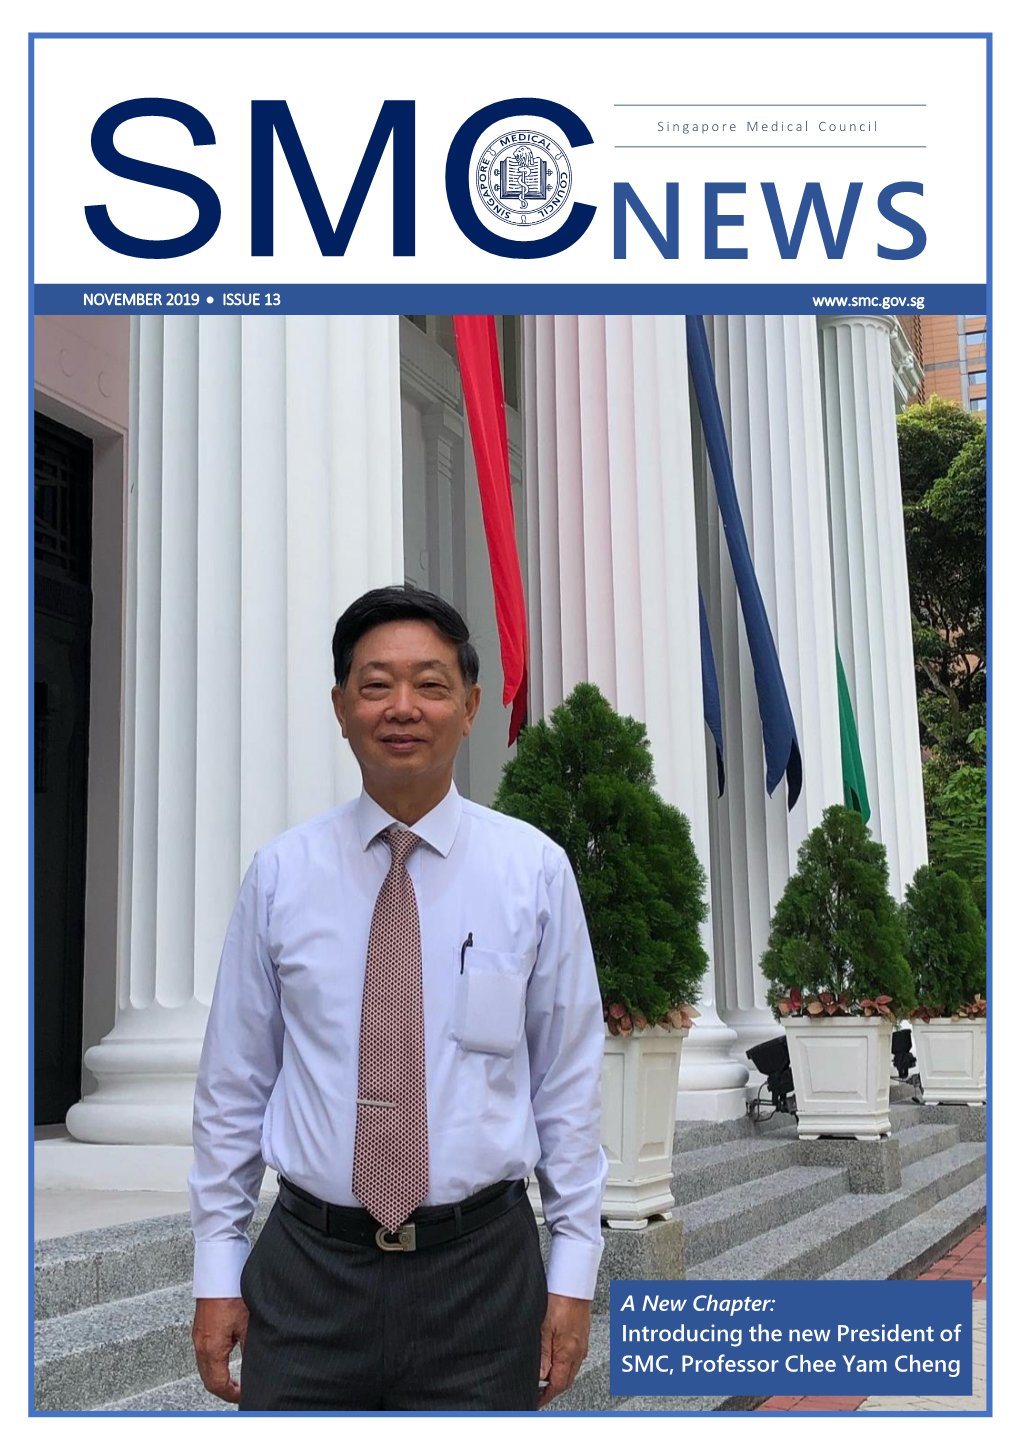 Introducing the New President of SMC, Professor Chee Yam Cheng